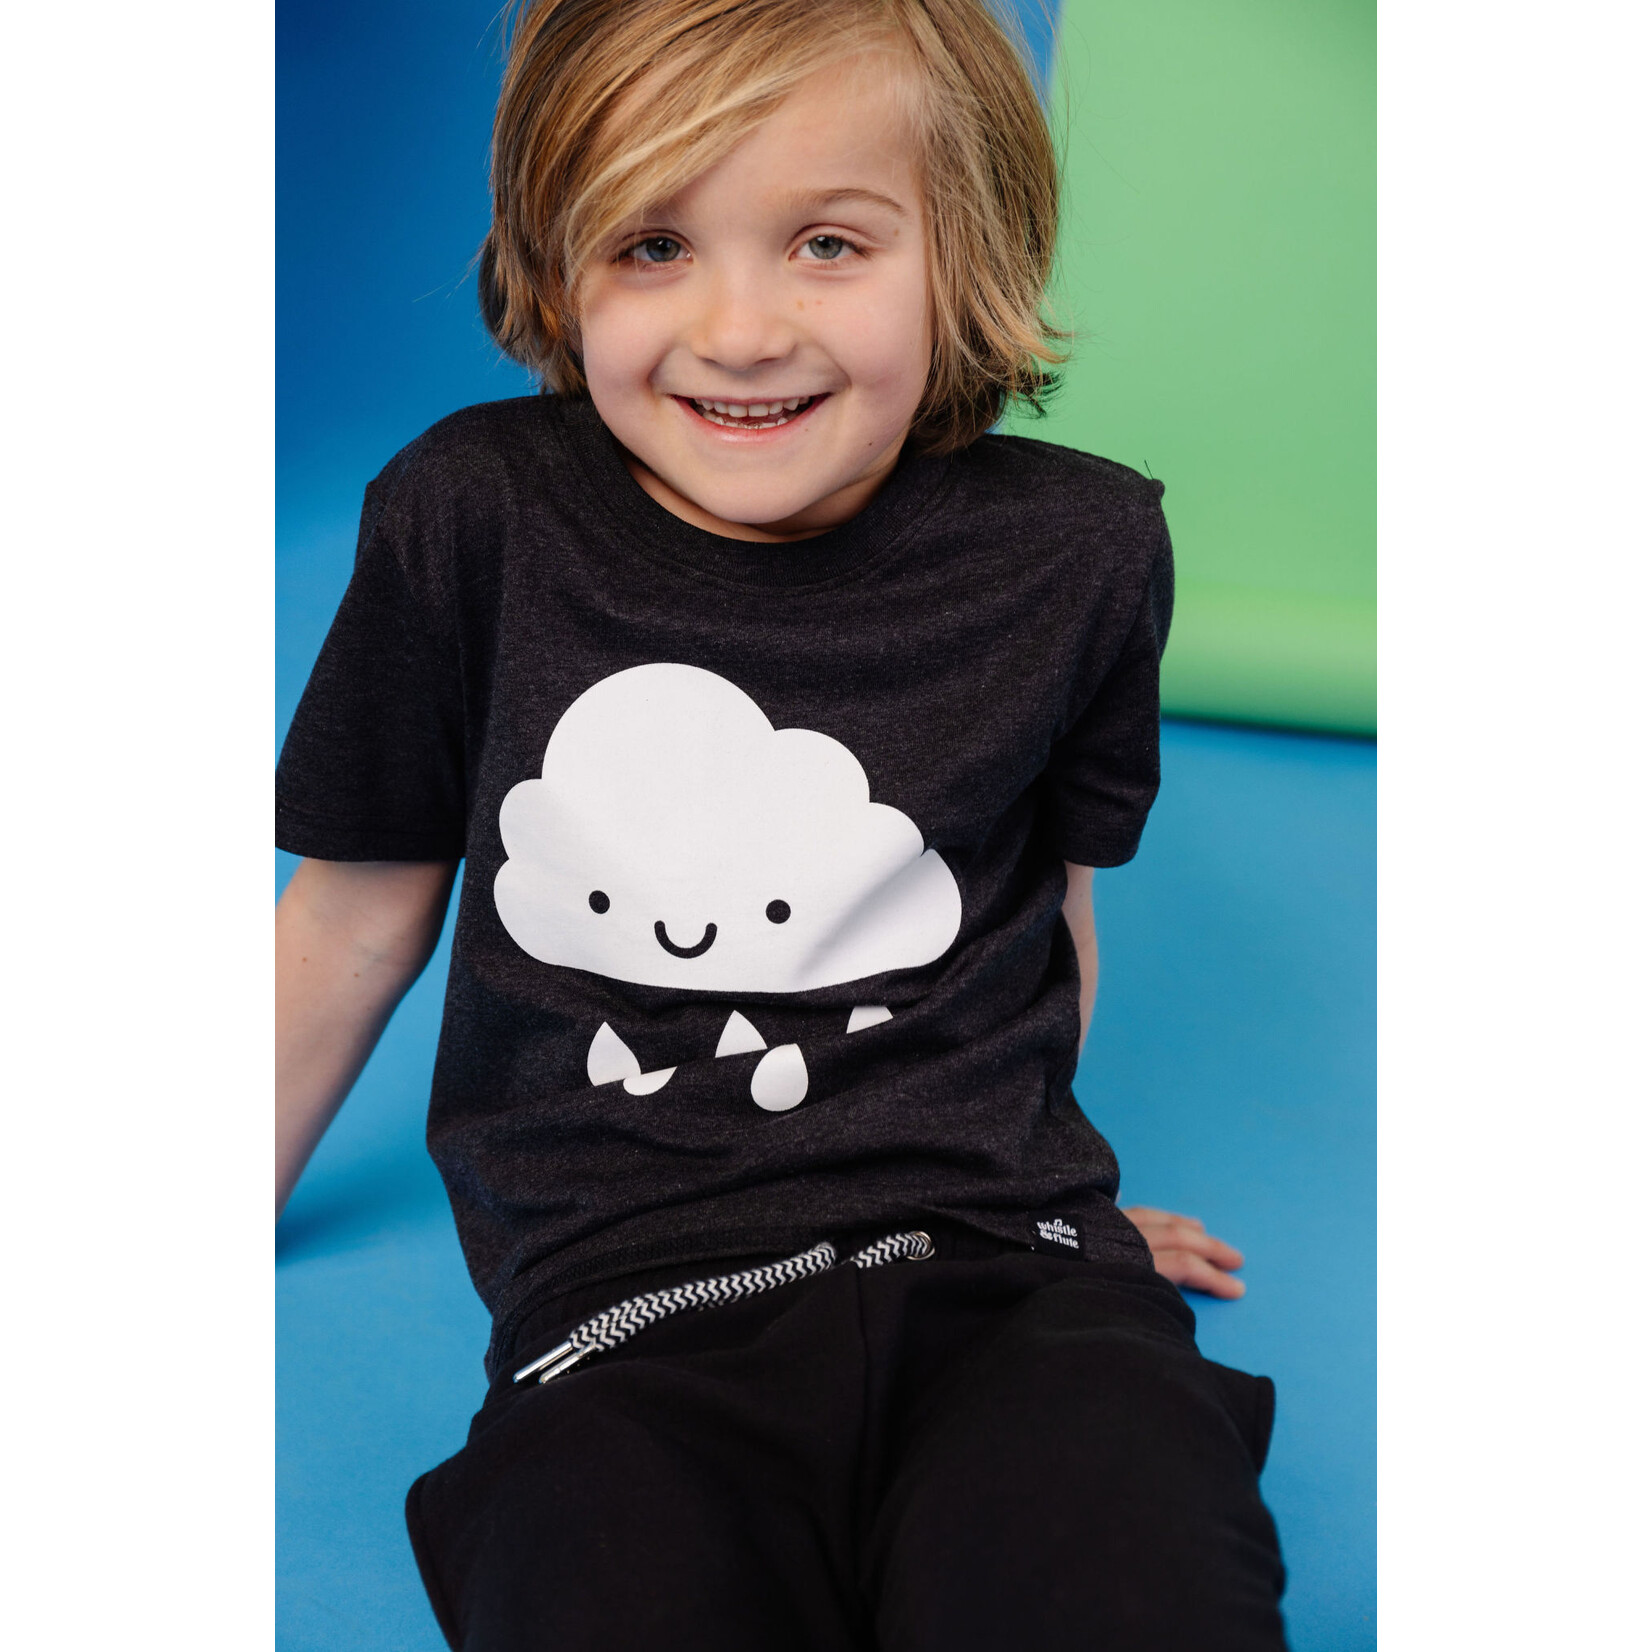 Whistle & Flute WHISTLE AND FLUTE - Shortsleeve Dark Grey T-shirt 'Kawaii - Cloud'